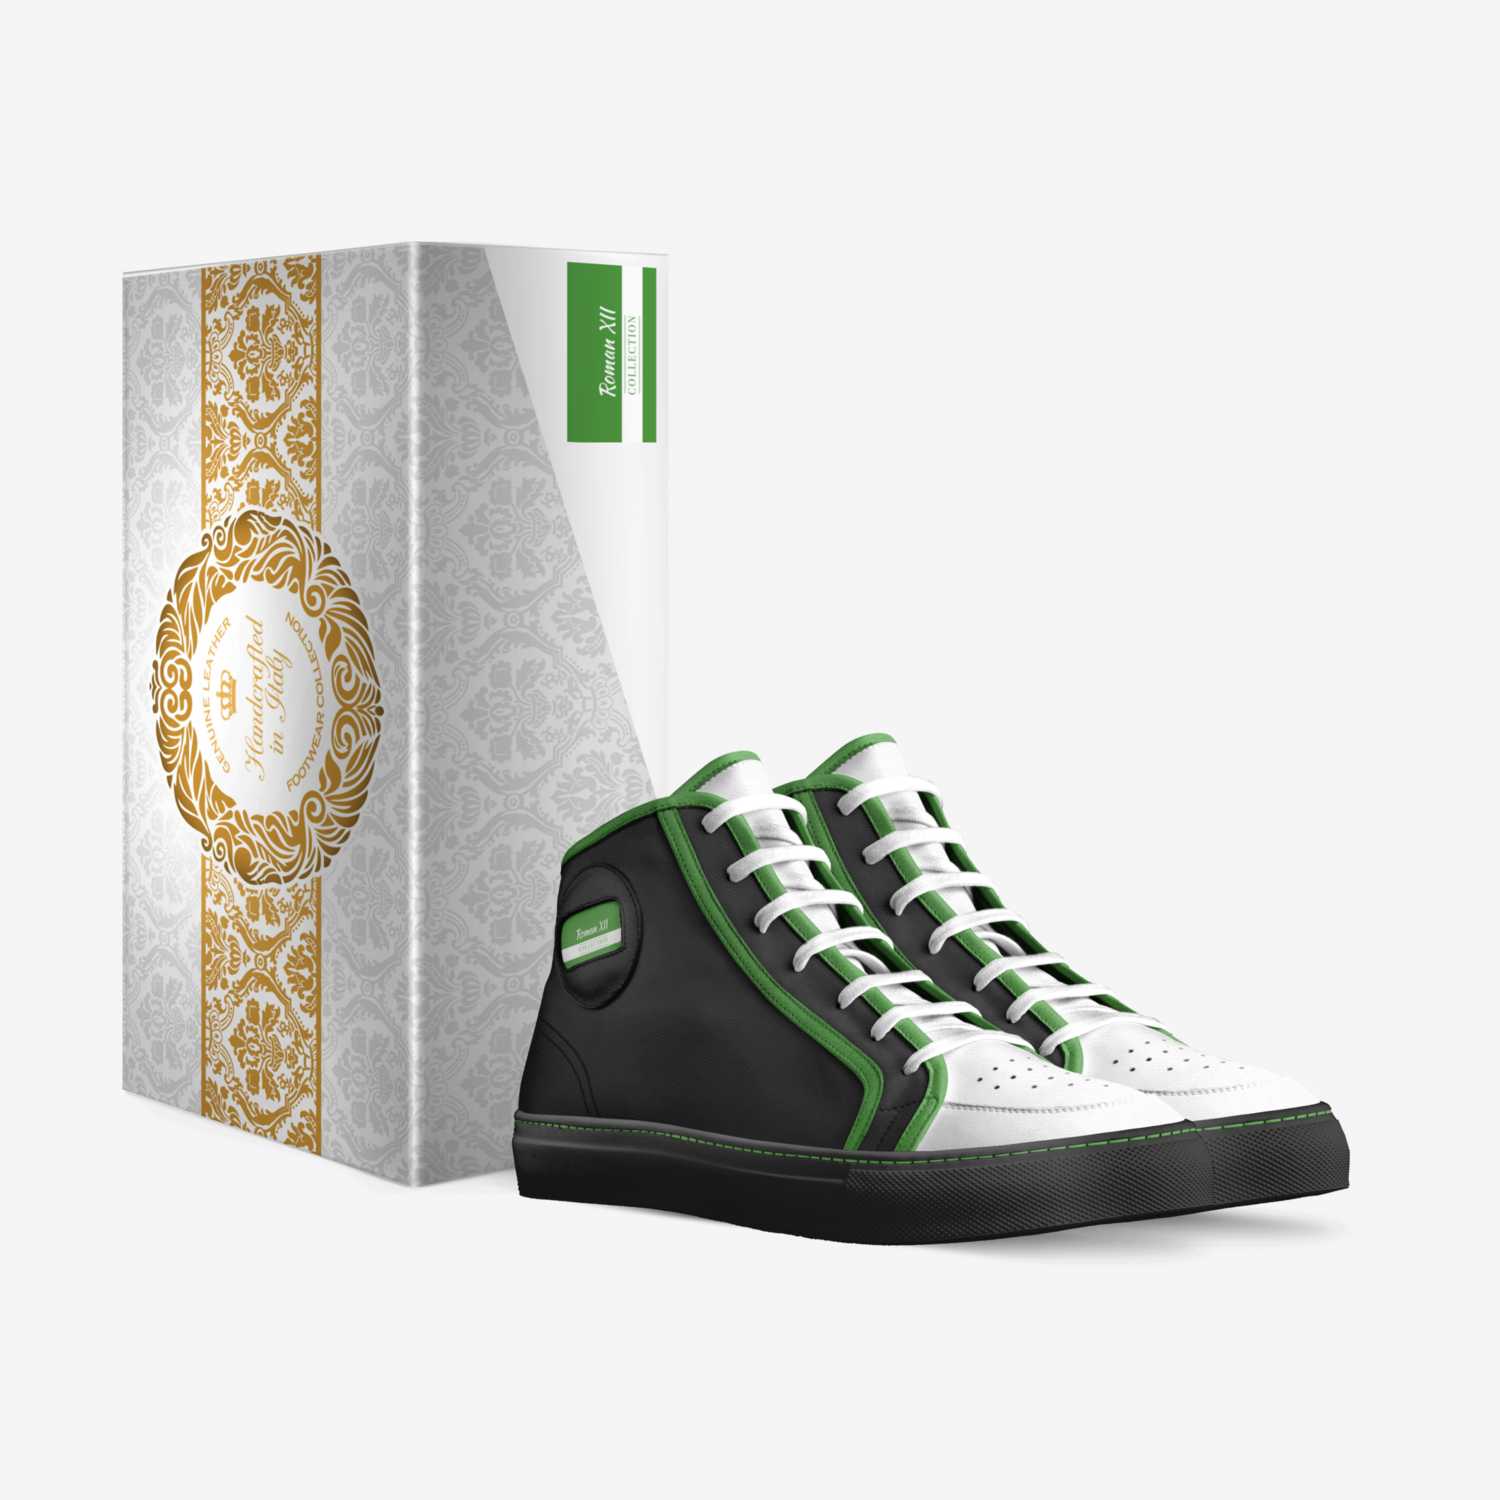 Roman 12's custom made in Italy shoes by Kalito Ayala | Box view